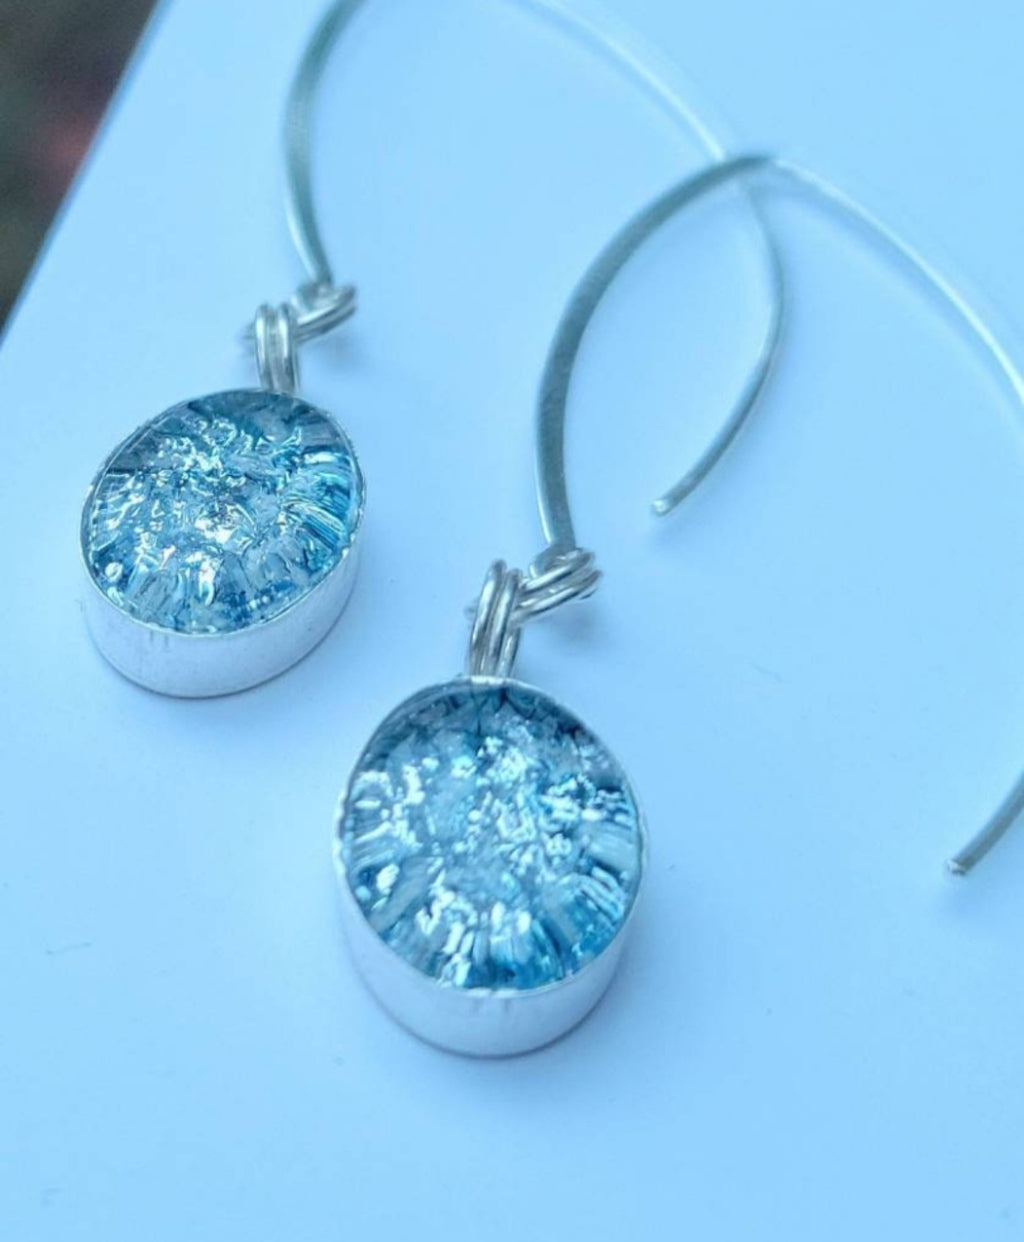 Dangling Earrings Sterling Silver 14x10mm Ashes InFused Glass Cremation Jewelry Flat Marquise Ear Wire